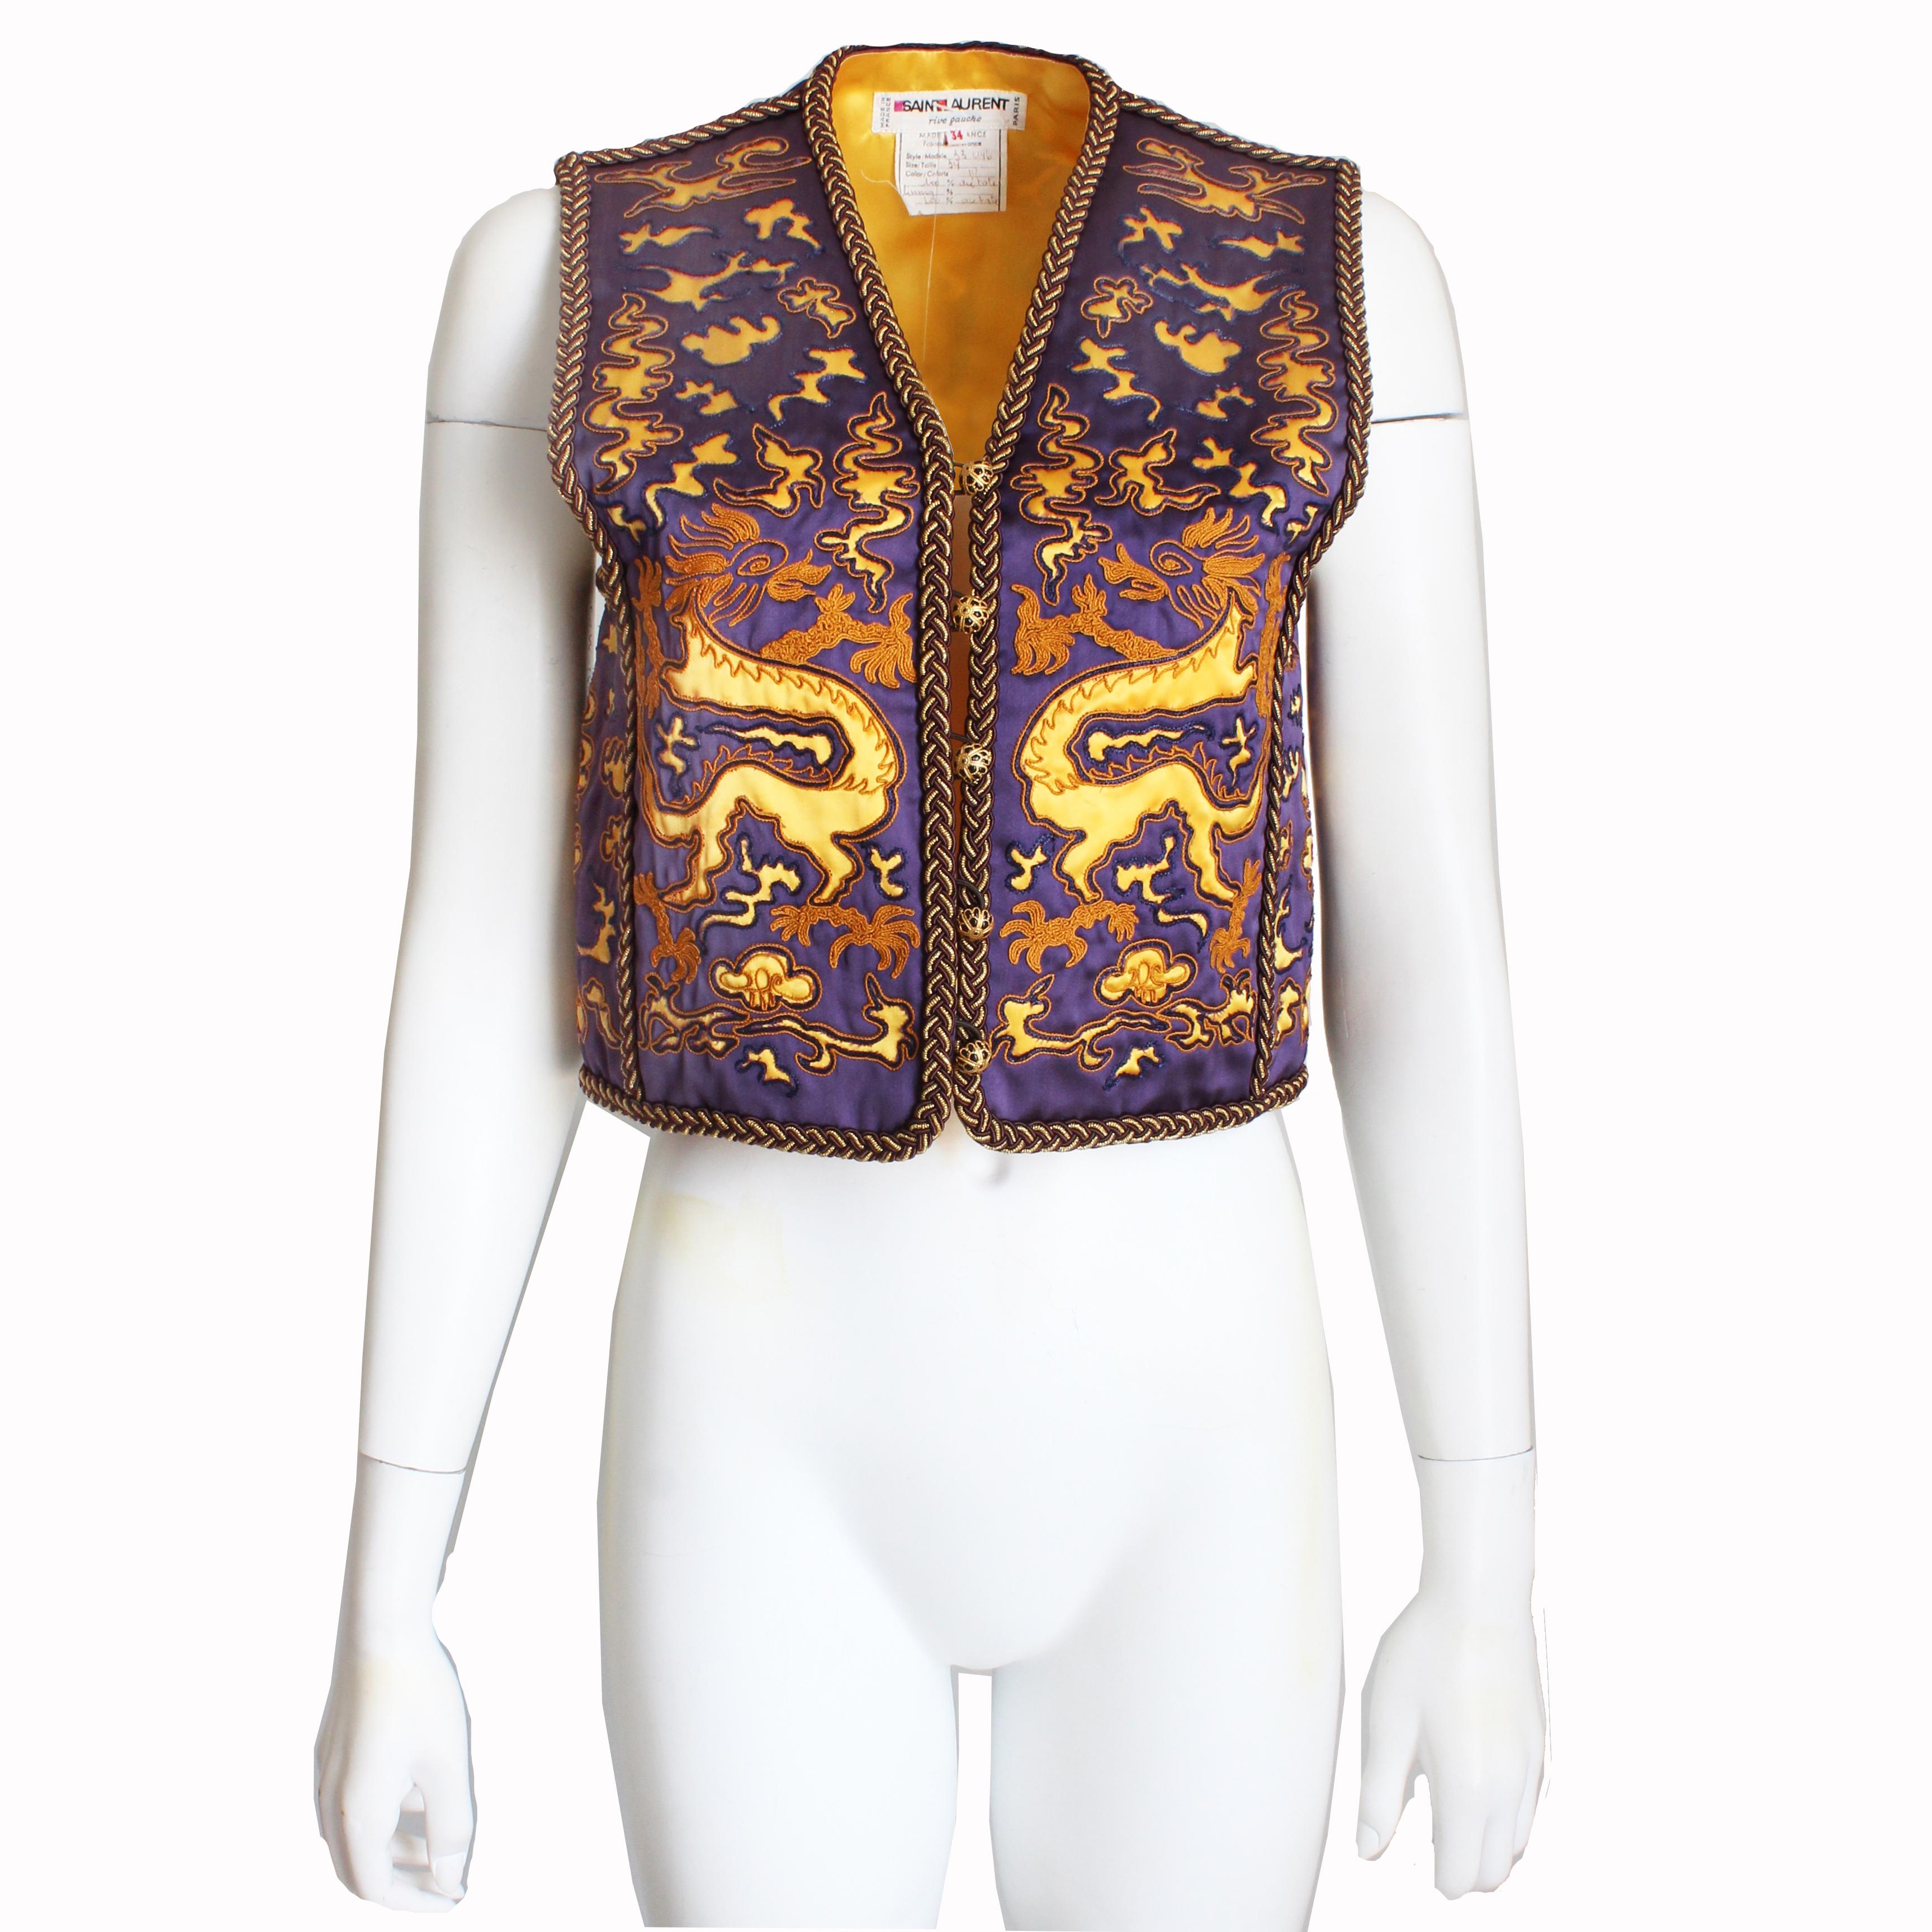 Vintage Yves Saint Laurent dragon vest, likely made in the late 60s or early 70s.  Made from a rich purple fabric, it features abstract golden dragon shapes with embroidery throughout and is trimmed in brown and gold braiding.  It fastens with five